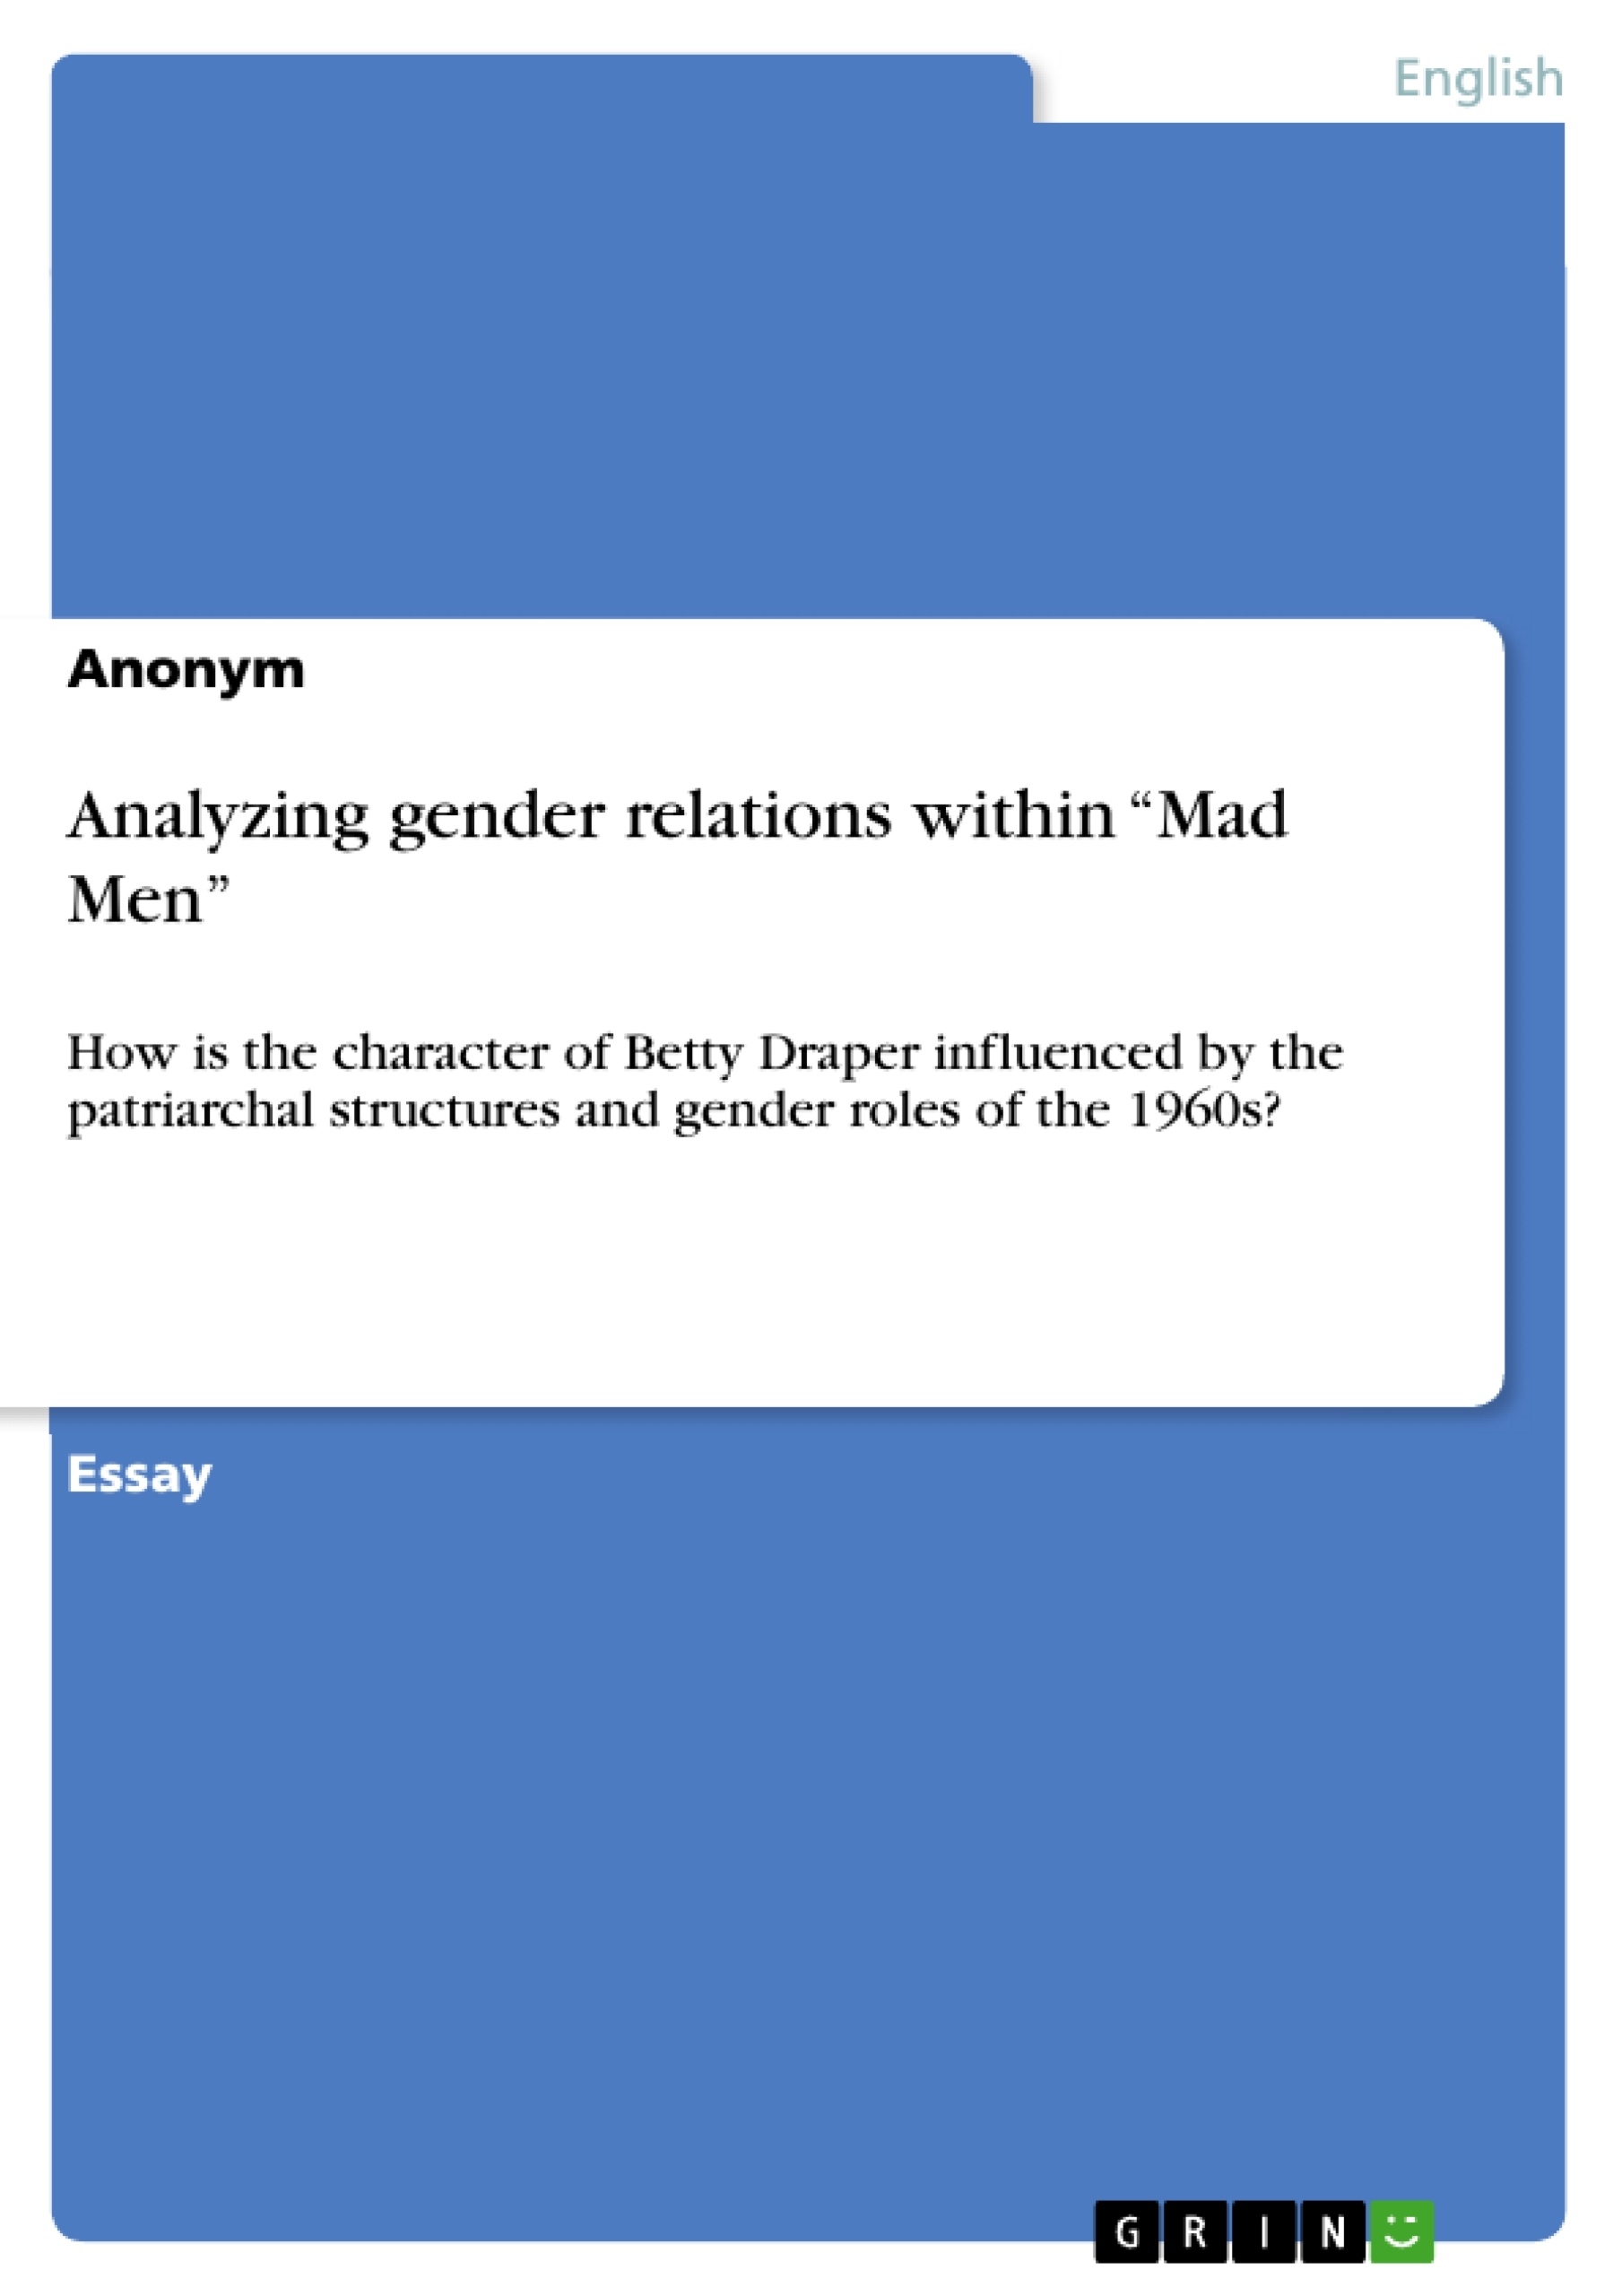 Title: Analyzing gender relations within “Mad Men”